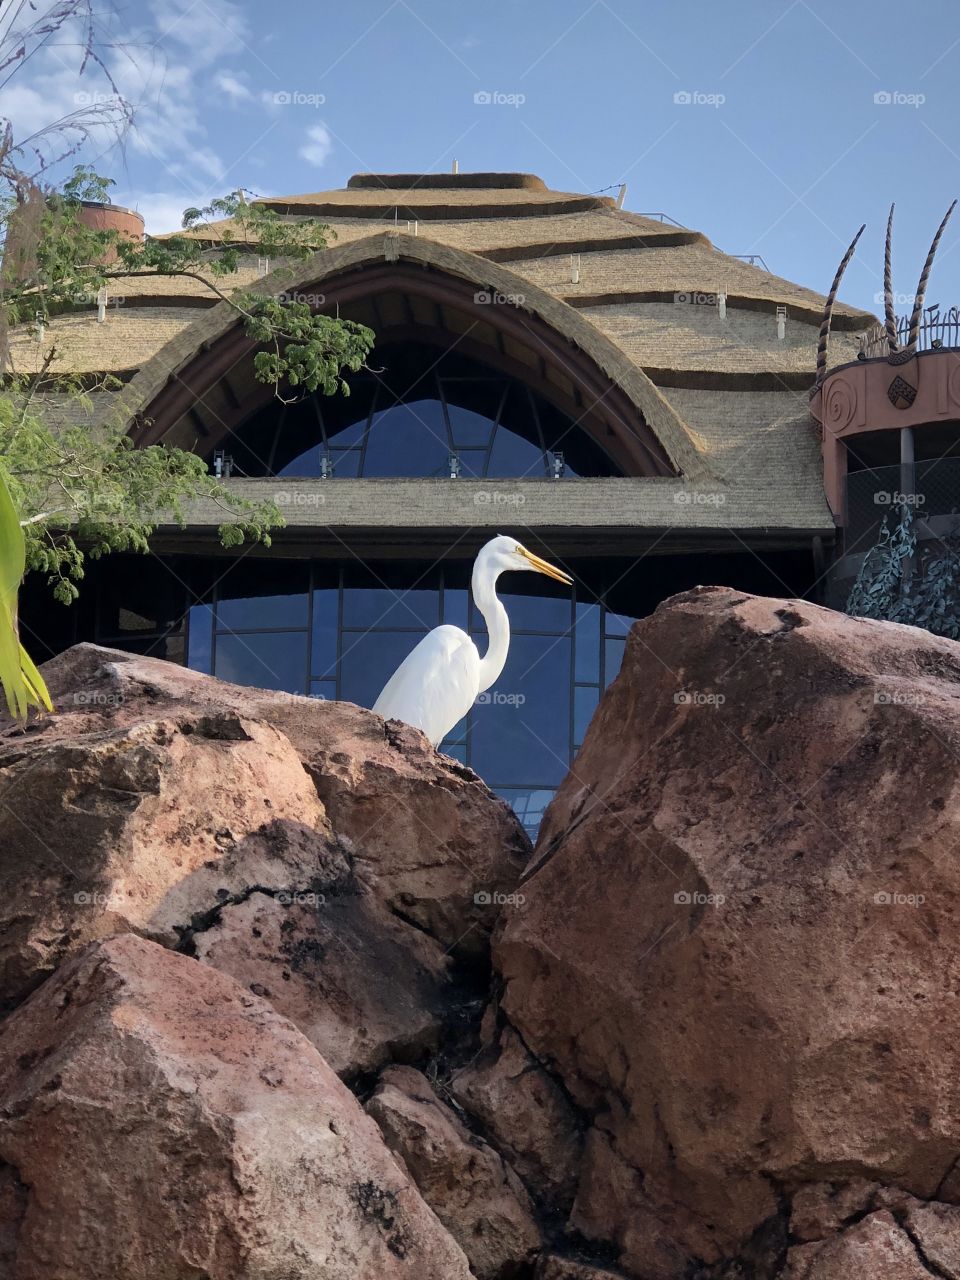 An egret, proudly perched on rocks.